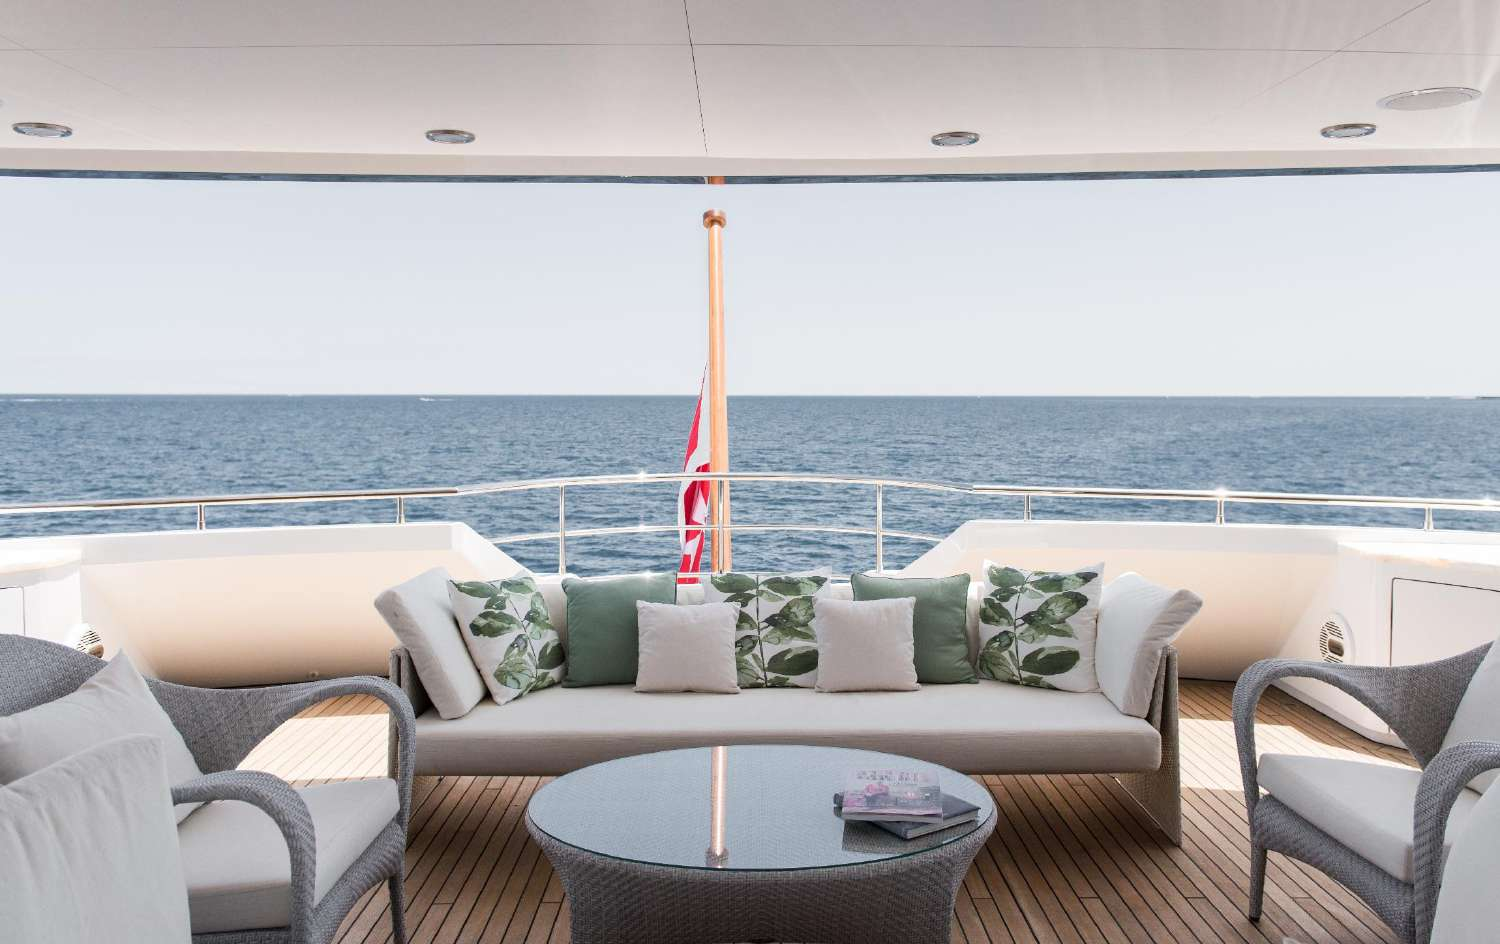 Aft Deck Seating Area